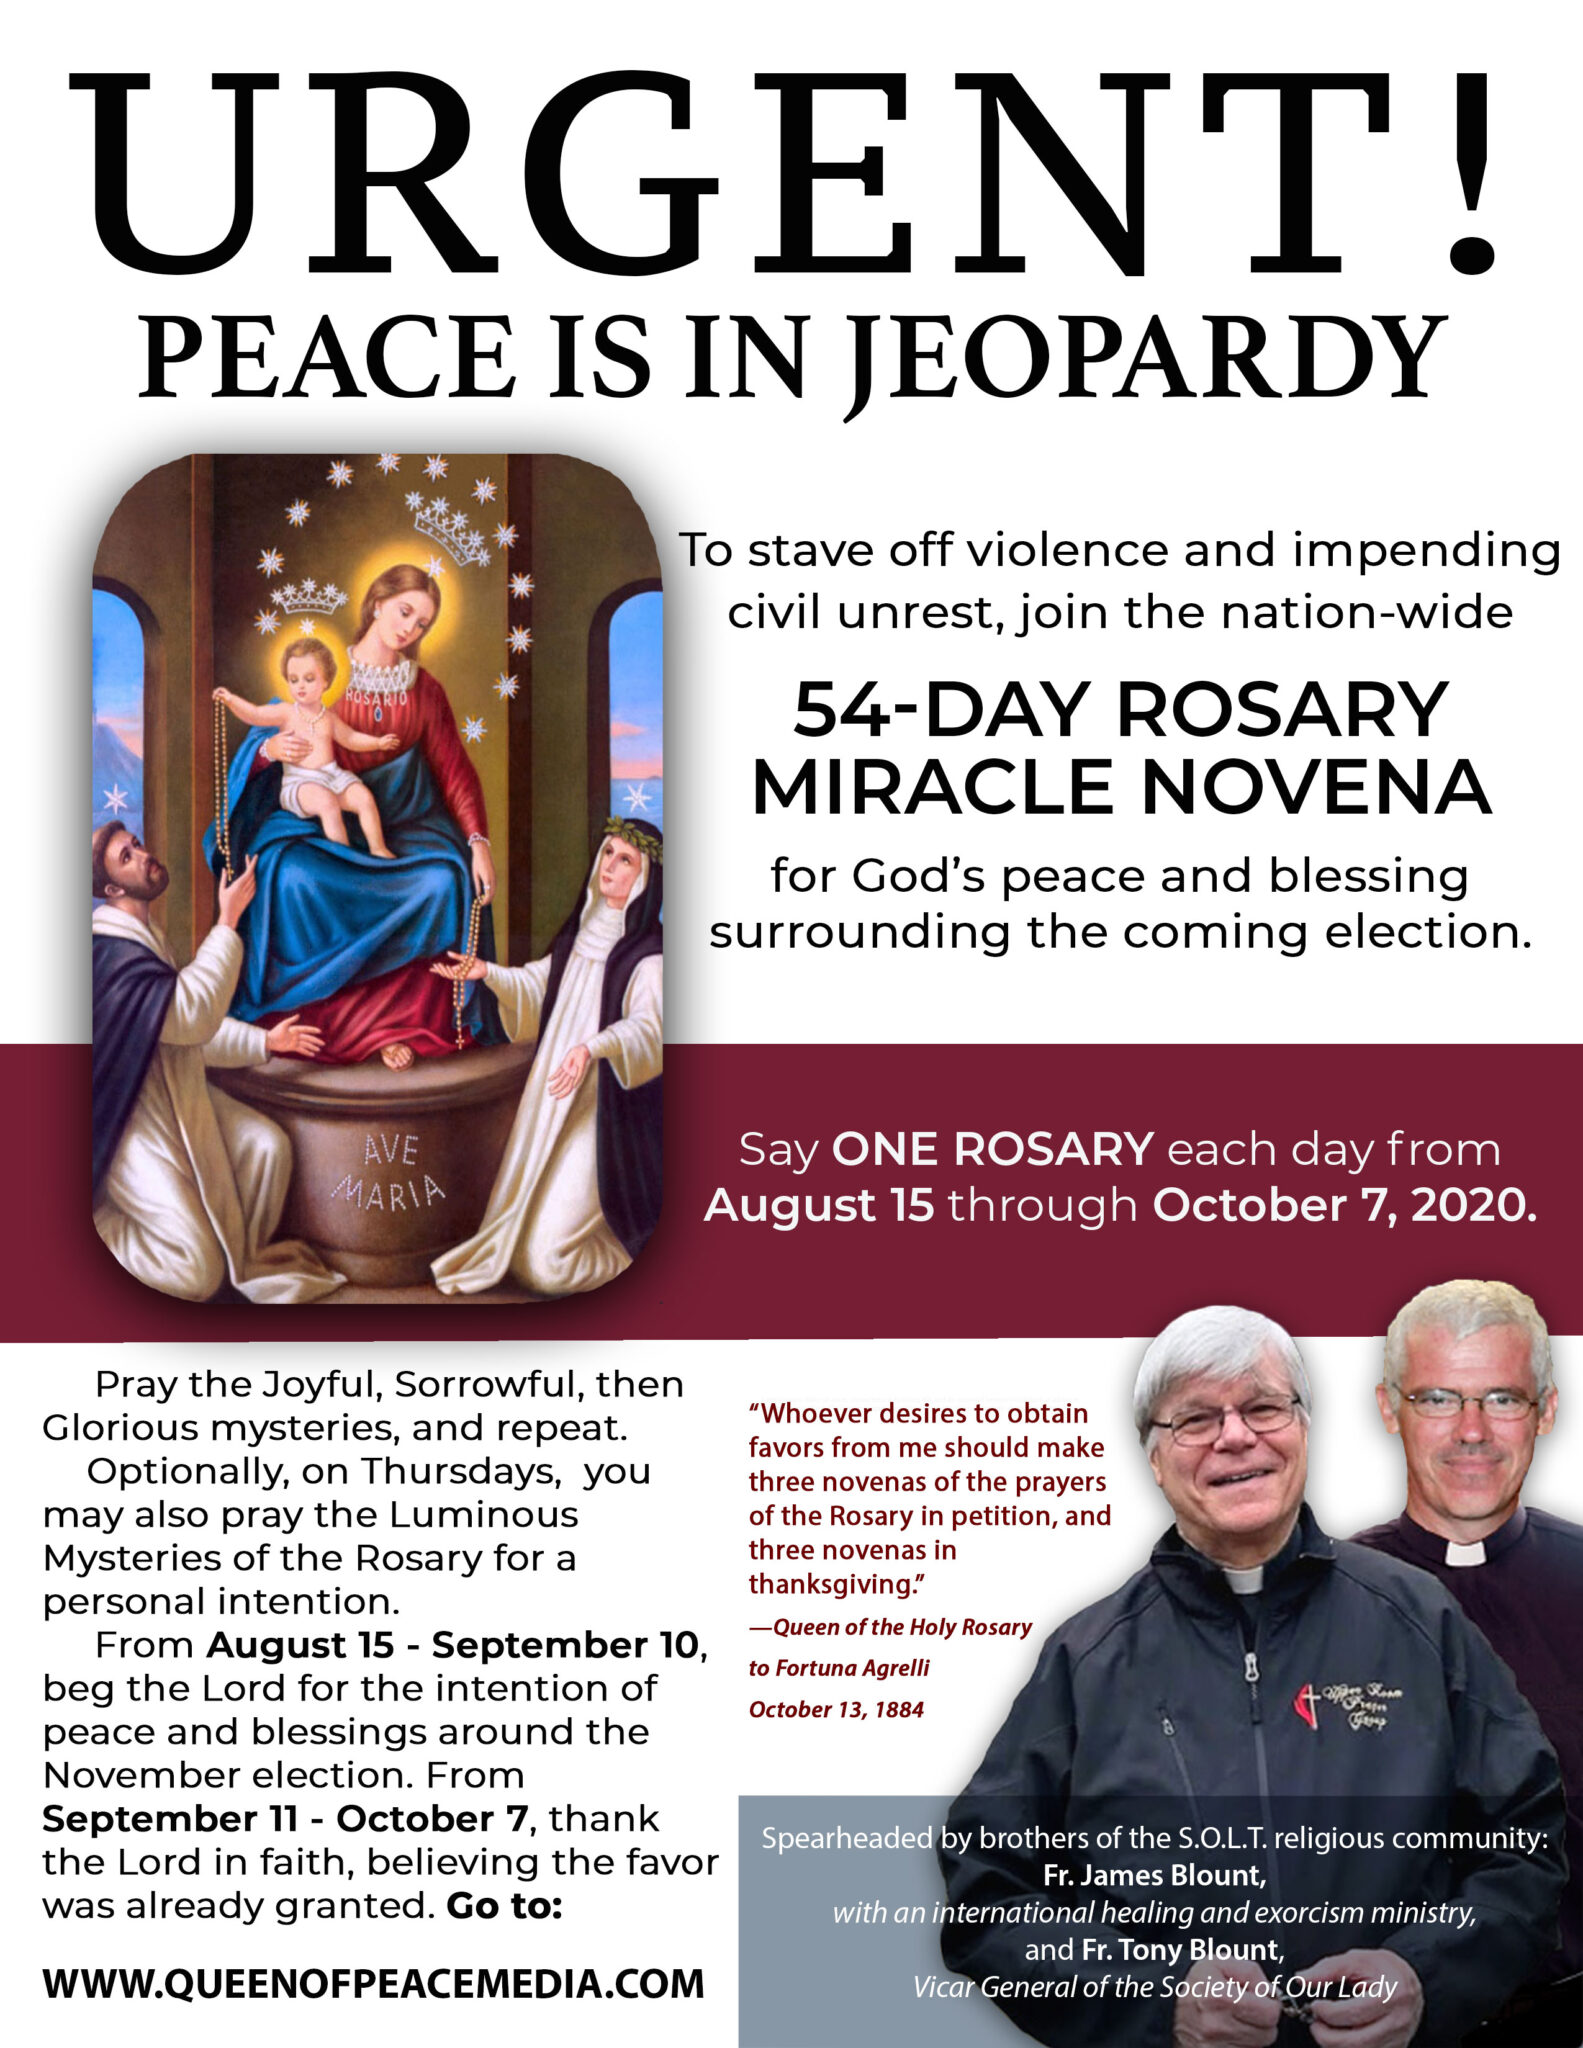 Pray for the Presidential Election - the 54 Day Rosary Miracle Novena.